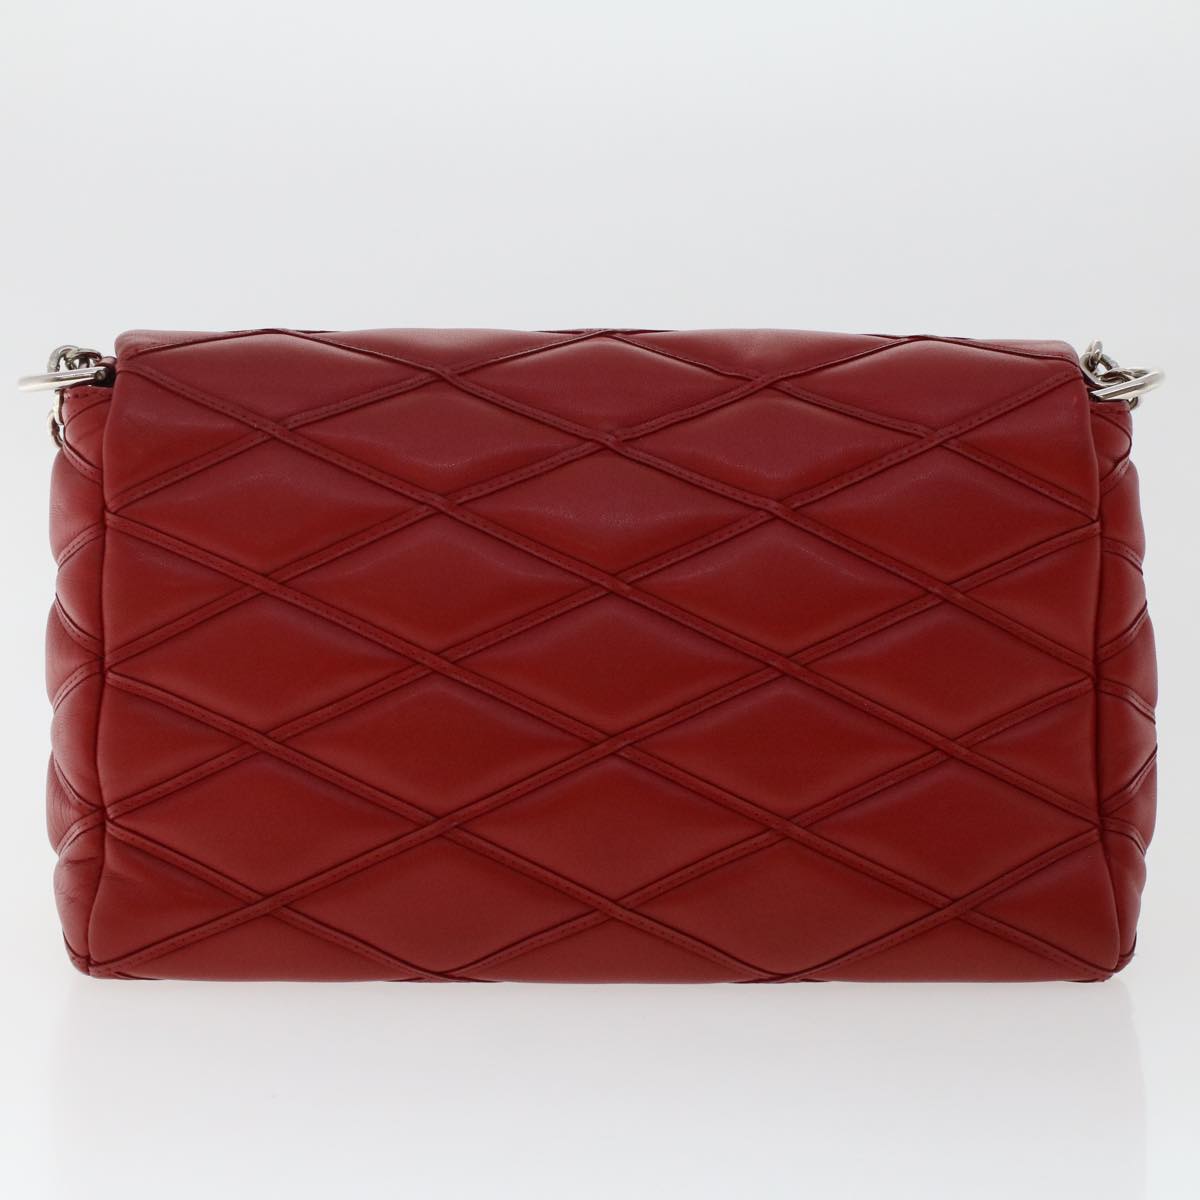 LOUIS VUITTON Quilted Chain Martage Shoulder Bag Leather Red M51000 Auth 49018A - 0